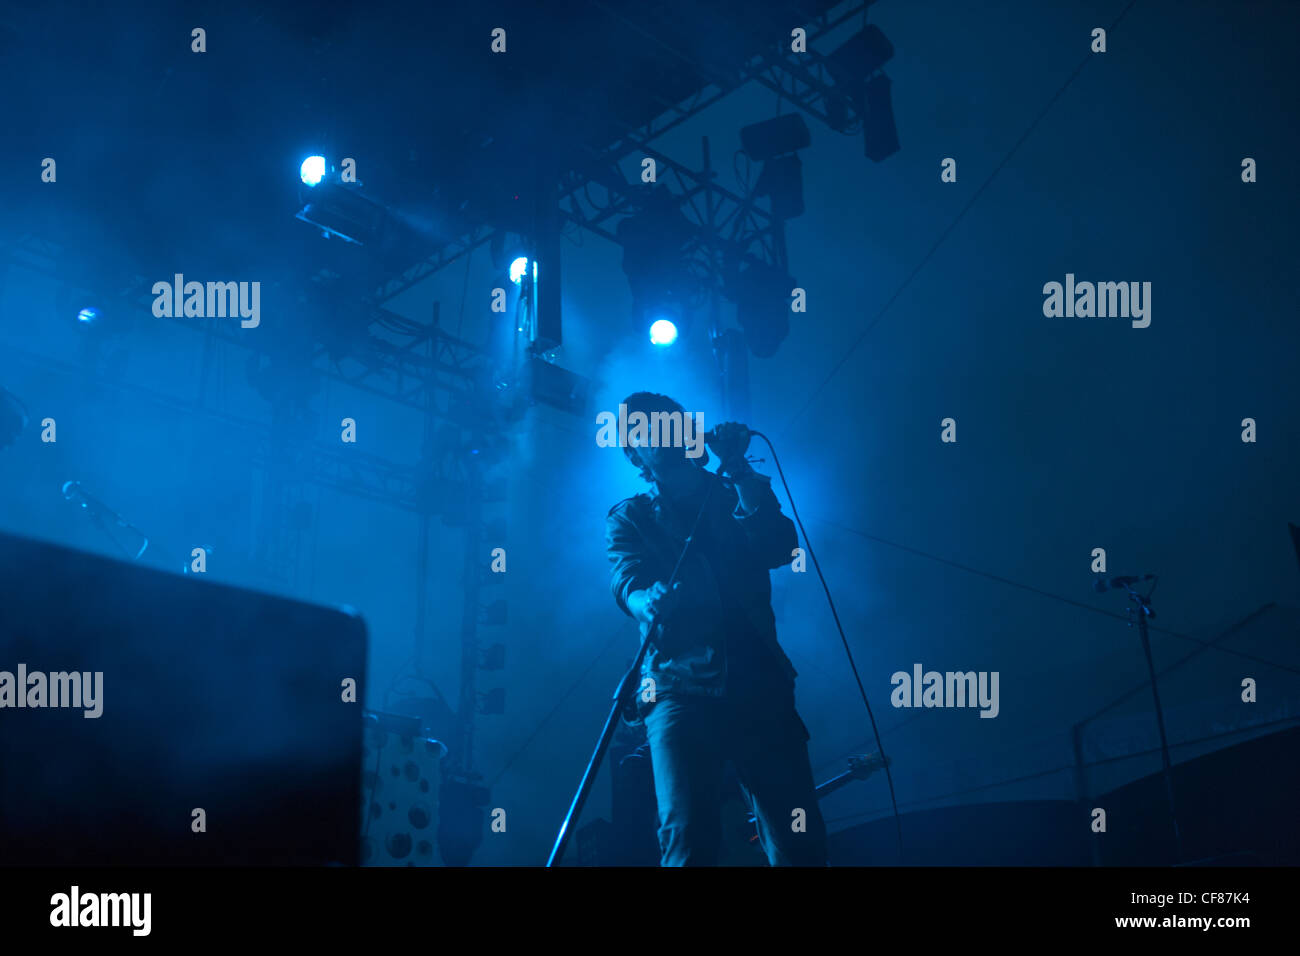 Singer for band Yeahsayer on stage with blue light, Sasquatch music festival Stock Photo